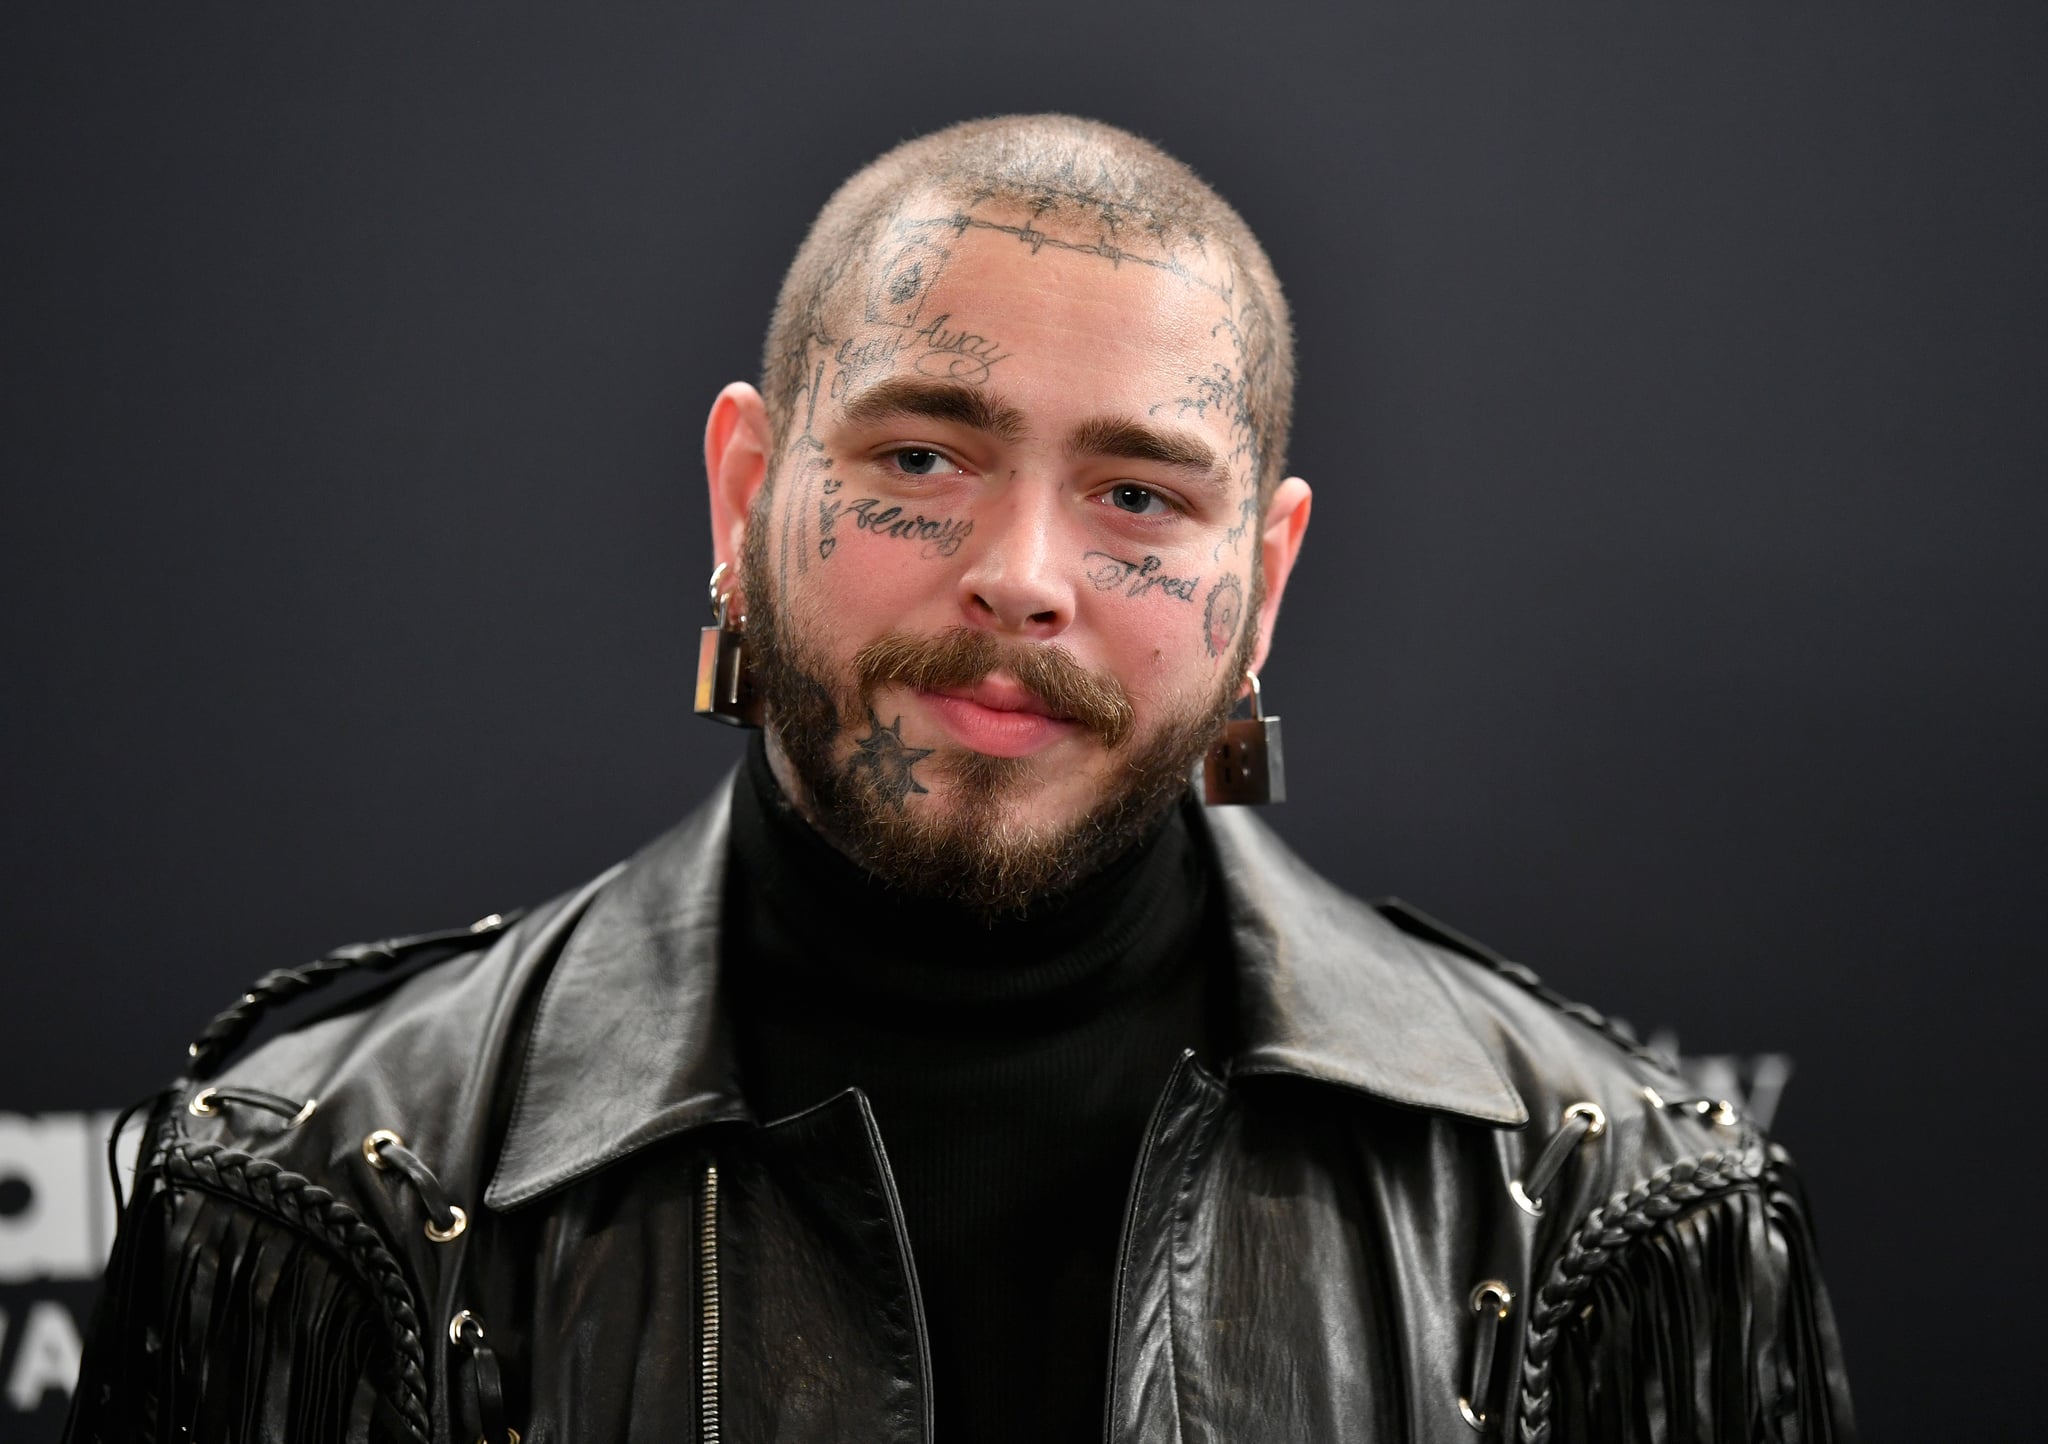 Know Post Malone's Net Worth & More Details! TheAltWeb